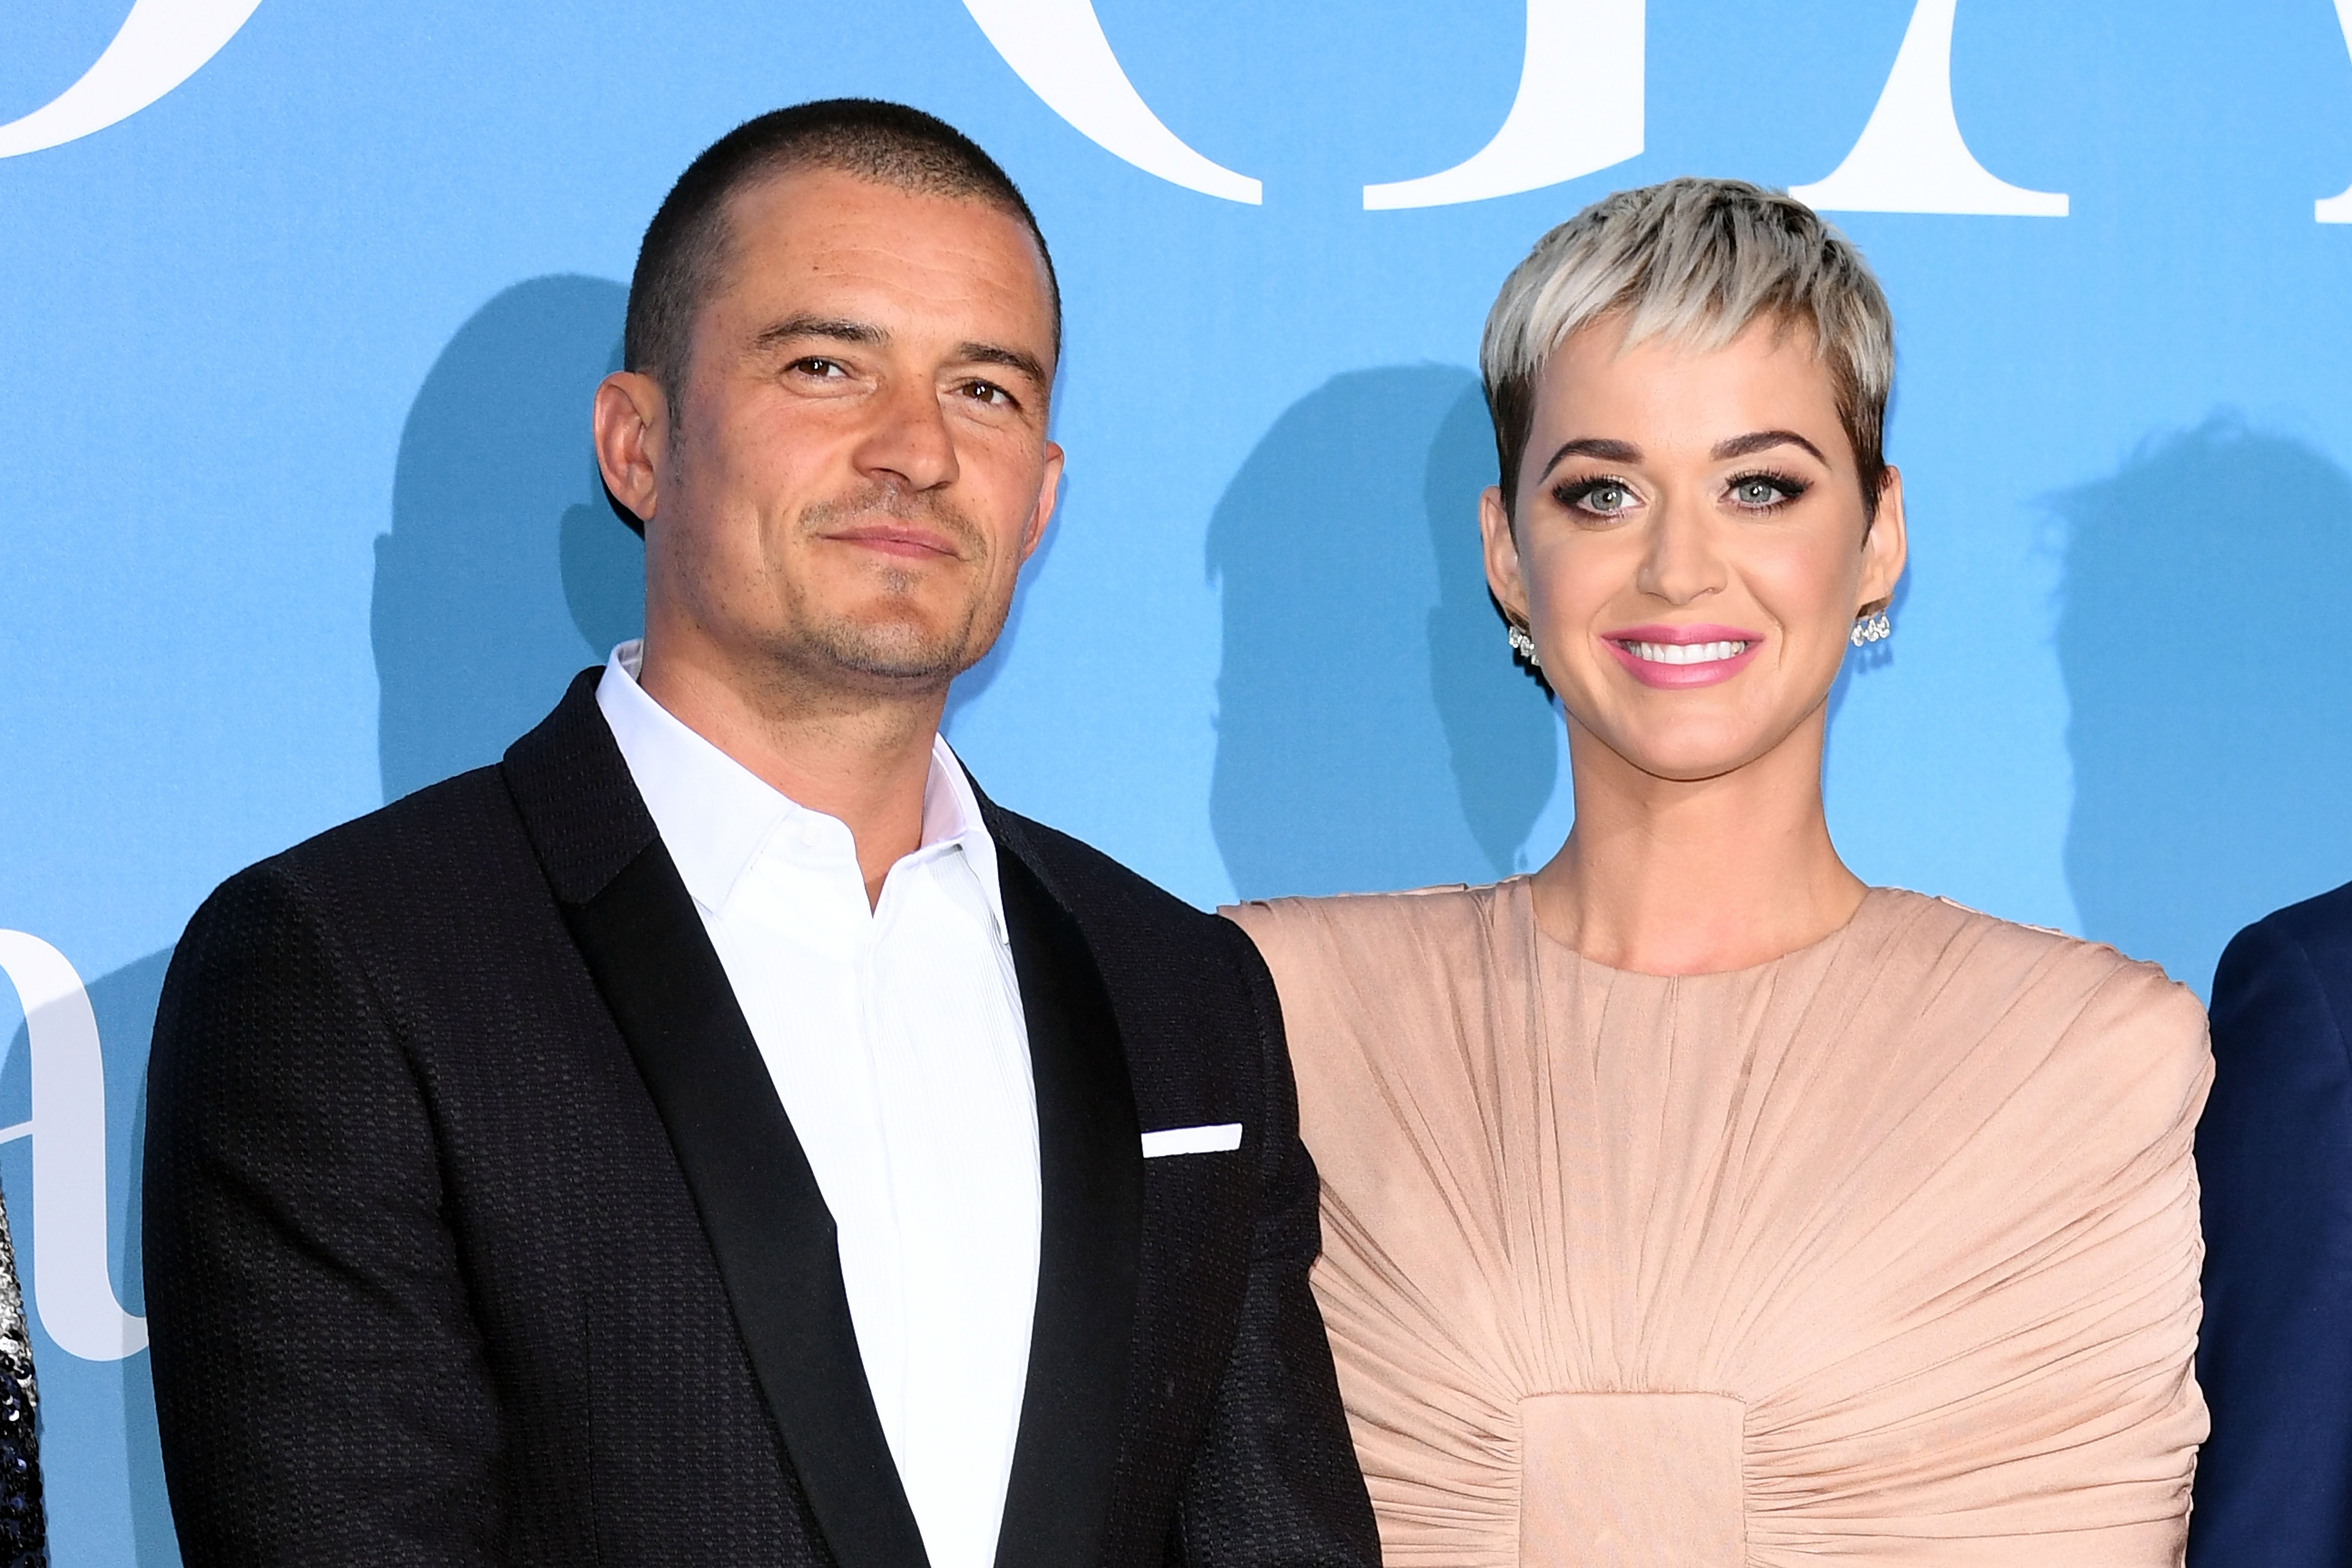 Orlando Bloom and Katy Perry attend the Monte-Carlo Gala for the Global Ocean 2018 on September 26, 2018 in Monte-Carlo, Monaco. | Photo: Getty Images